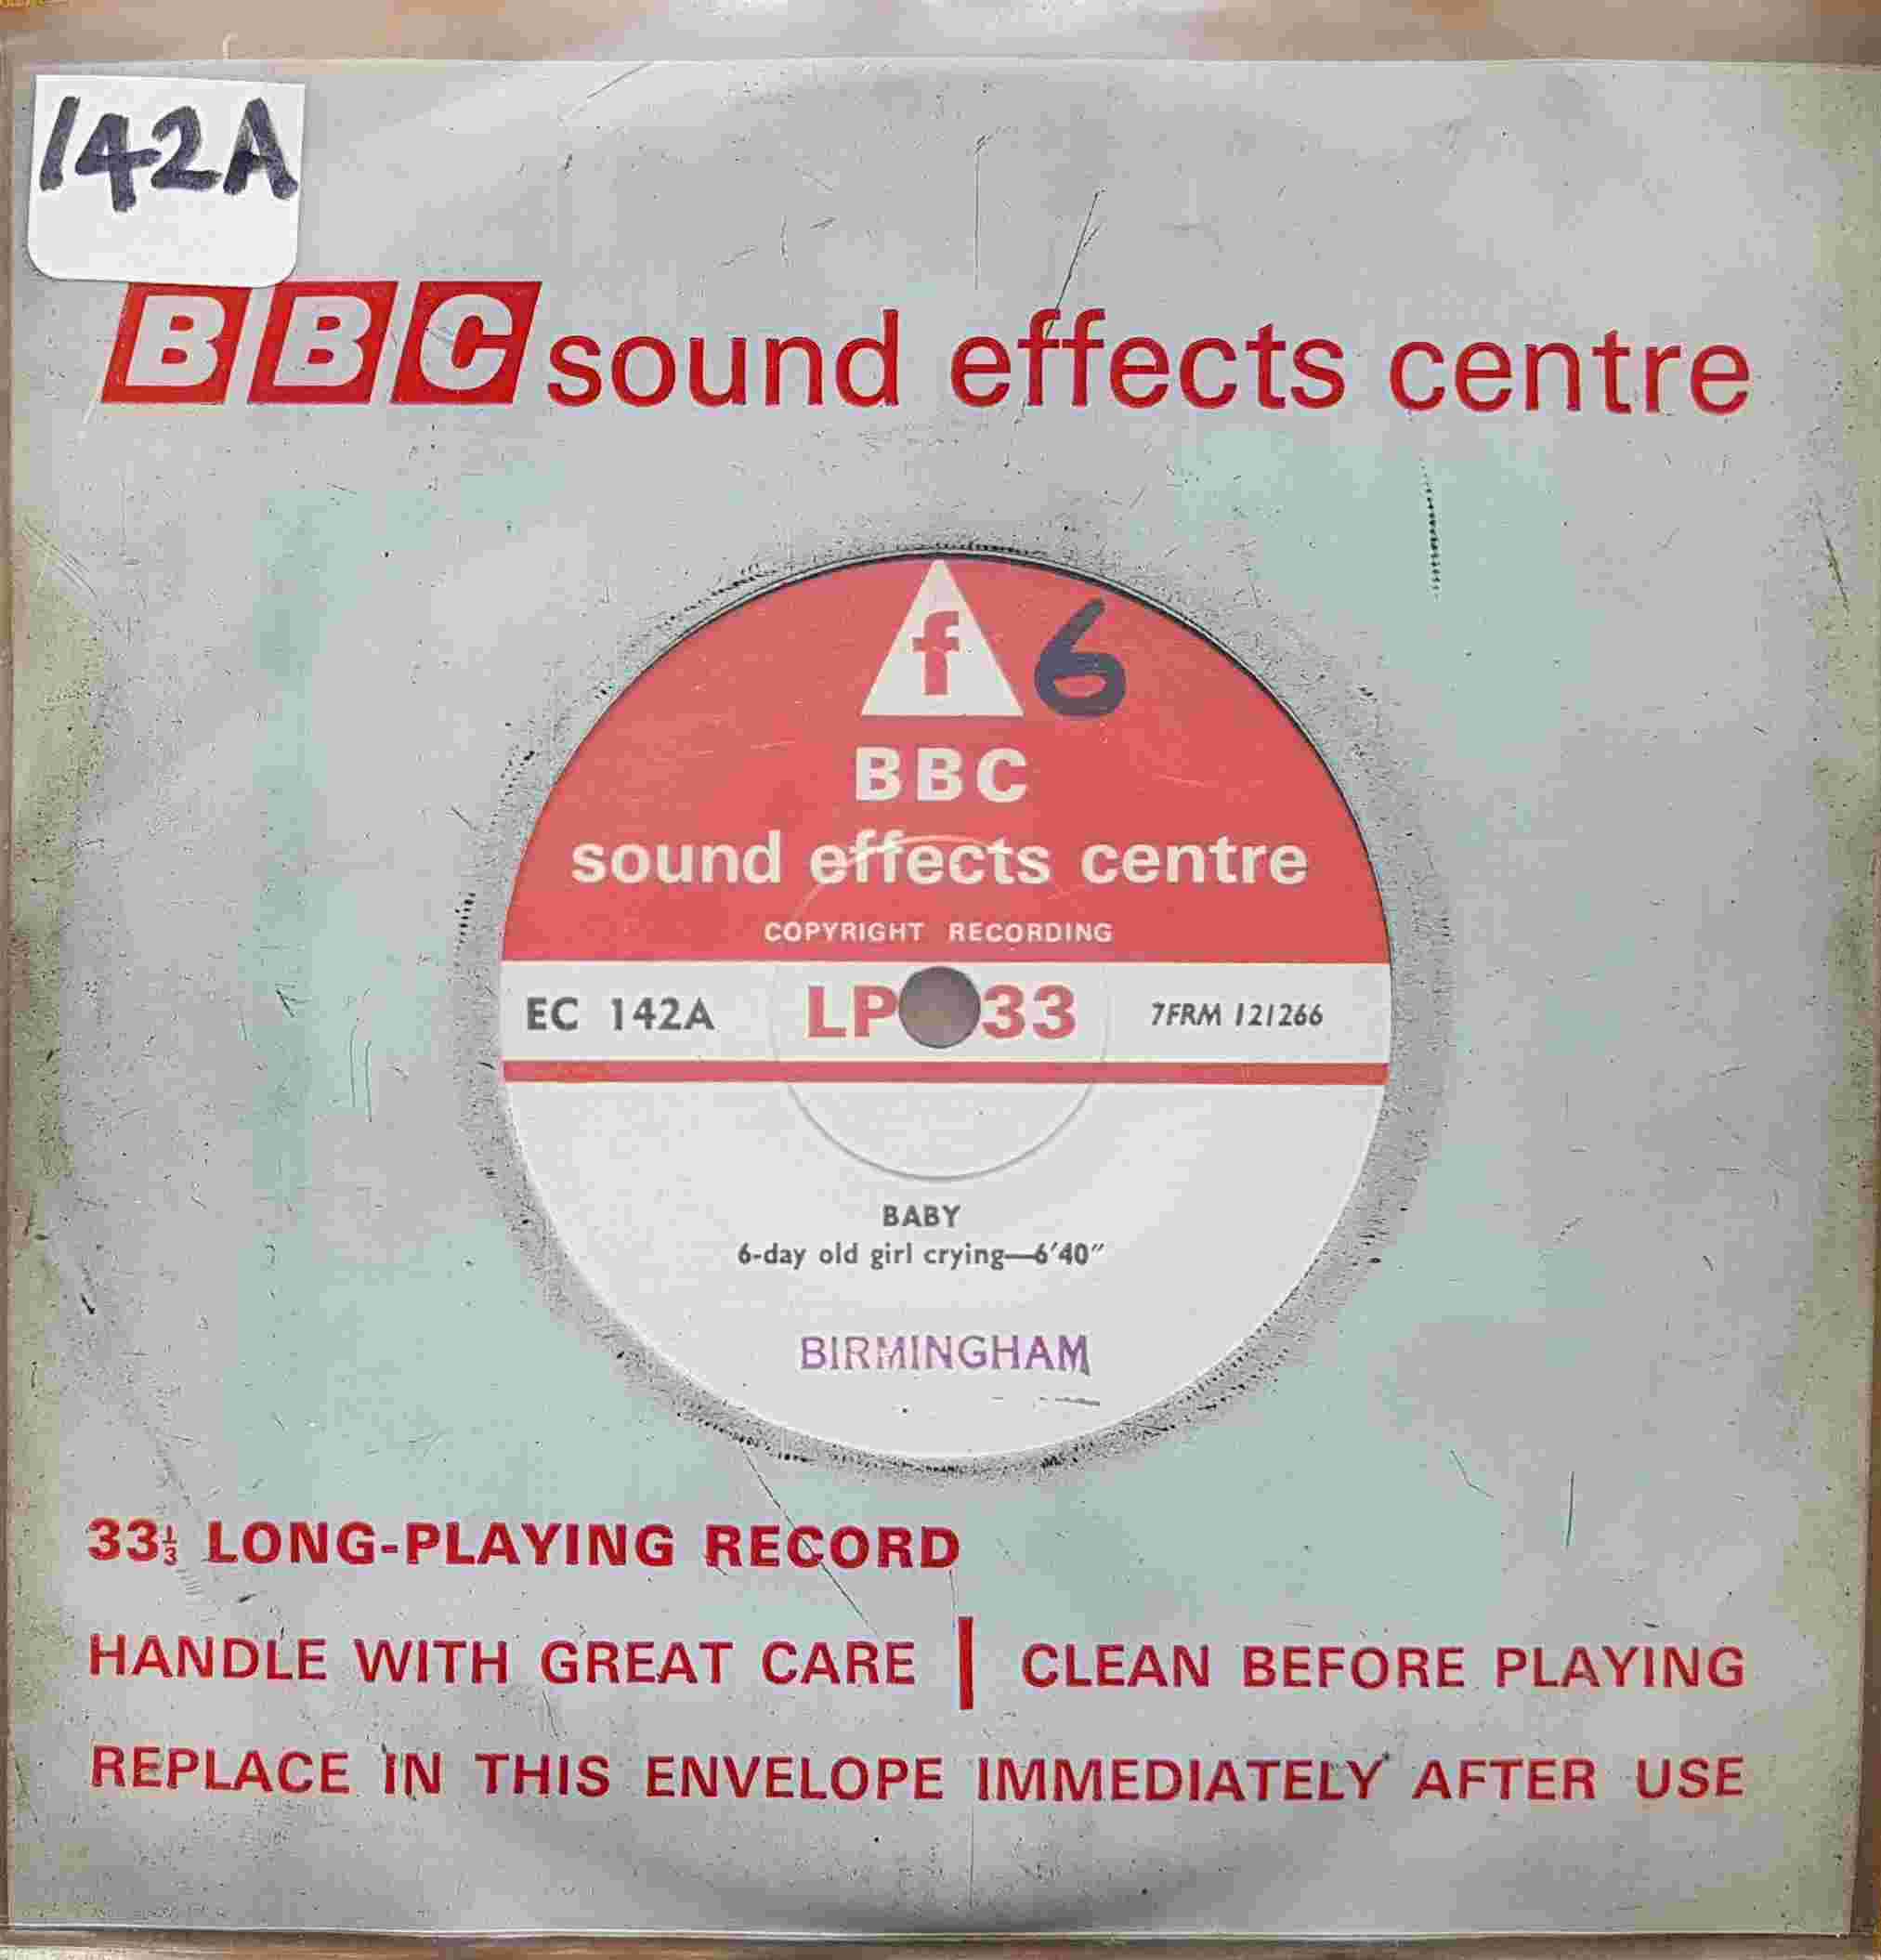 Picture of EC 142A Baby by artist Not registered from the BBC singles - Records and Tapes library